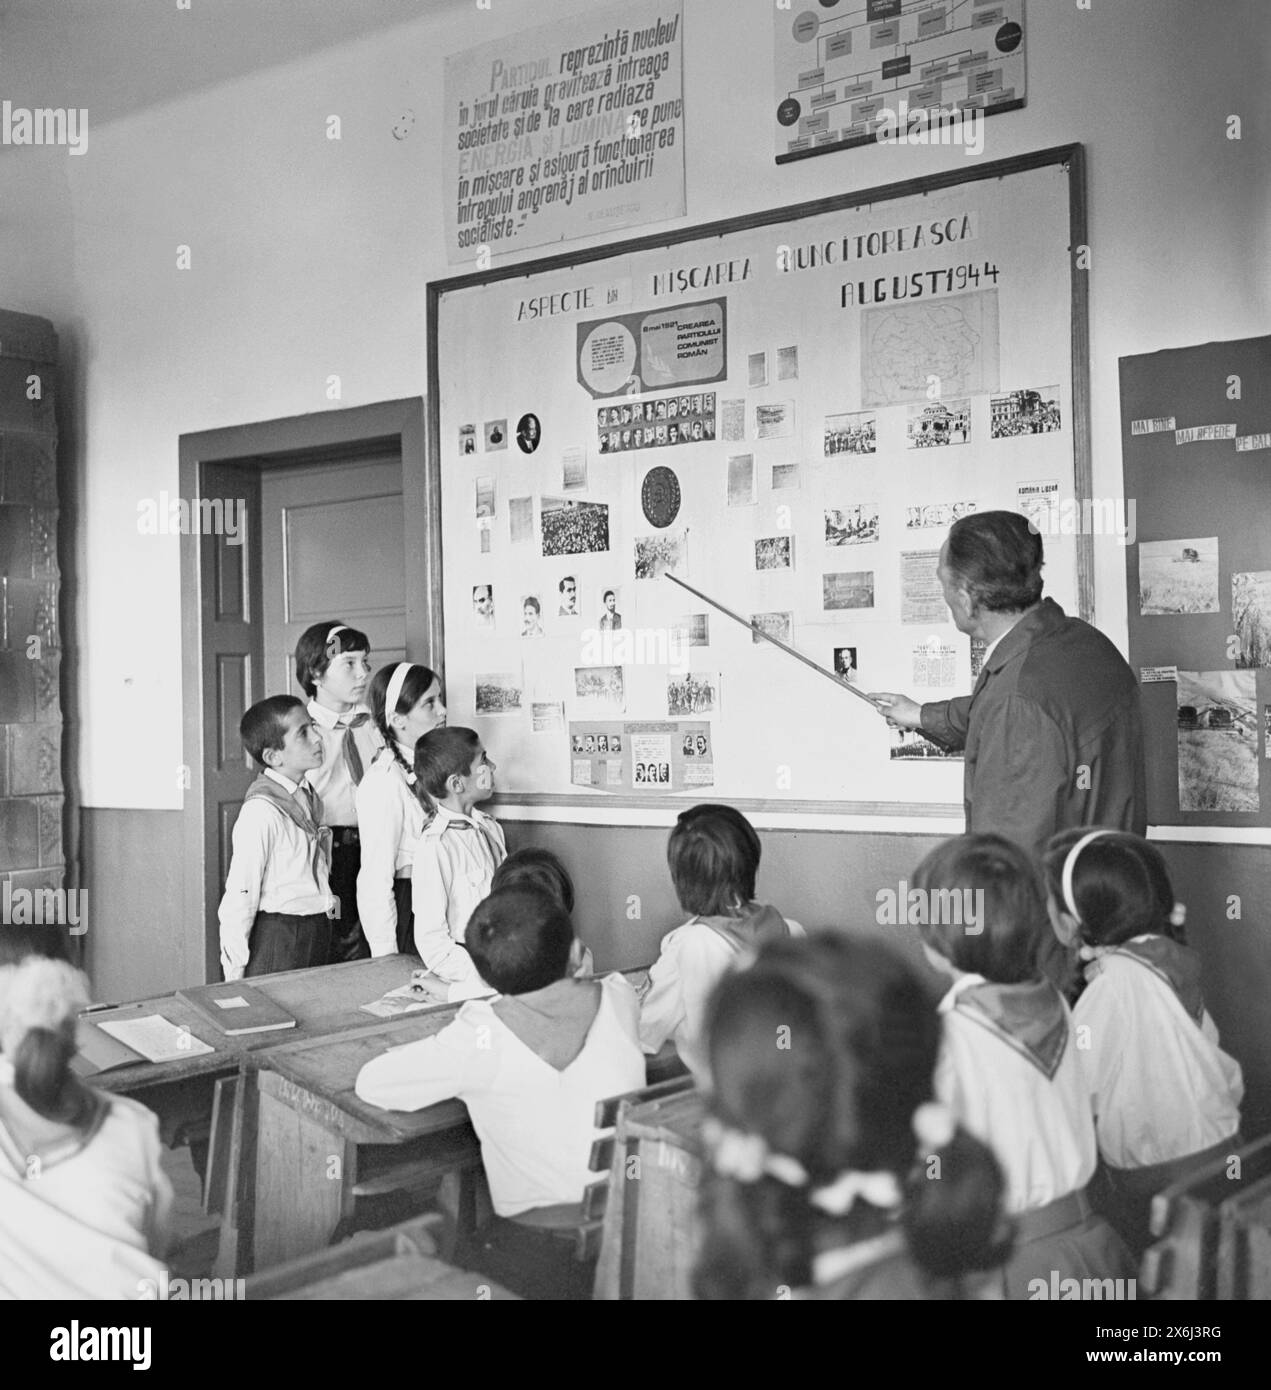 Socialist Republic of Romania, 1970s. Elementary students during a class in a governmental school. The teacher is pointing to a propagandist board entitled 'Aspects of the Worker's Movement', including the creation and the symbols of the Communist Party, its main leaders, & the events of August 1944, which led to Romania getting under the Soviet control. Another board at the top says: 'The Party represents the nucleus around which the whole society gravitates and from which radiates the energy and light that sets in motion and ensures the functioning of the entire gear of the Socialist system. Stock Photo